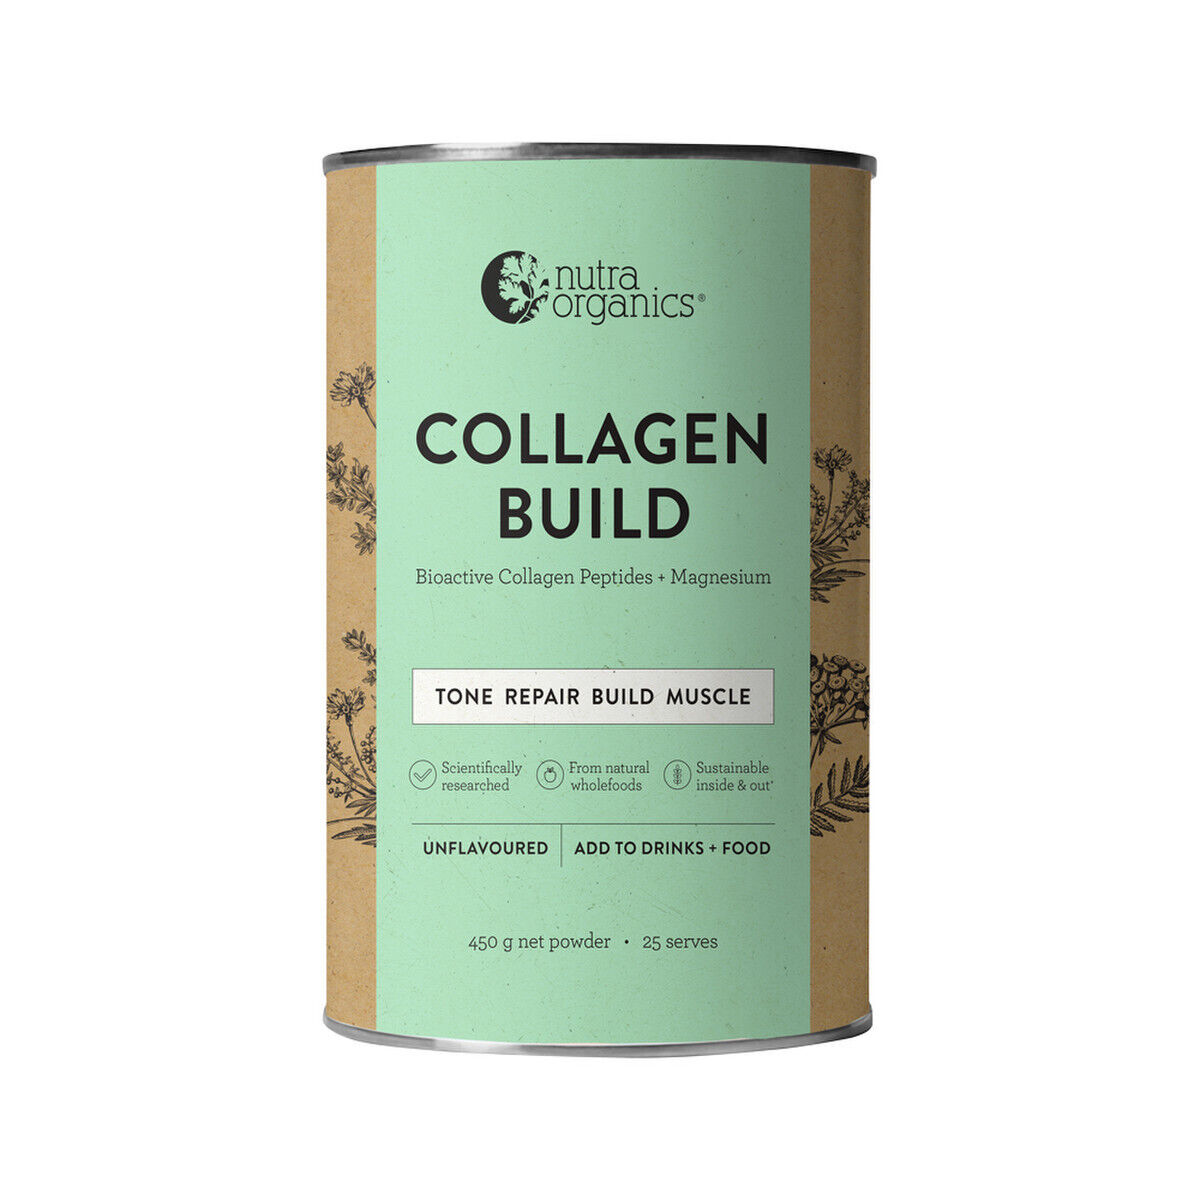 Nutra Organics Collagen Build Tone Repair Build Muscle 450g Unflavoured